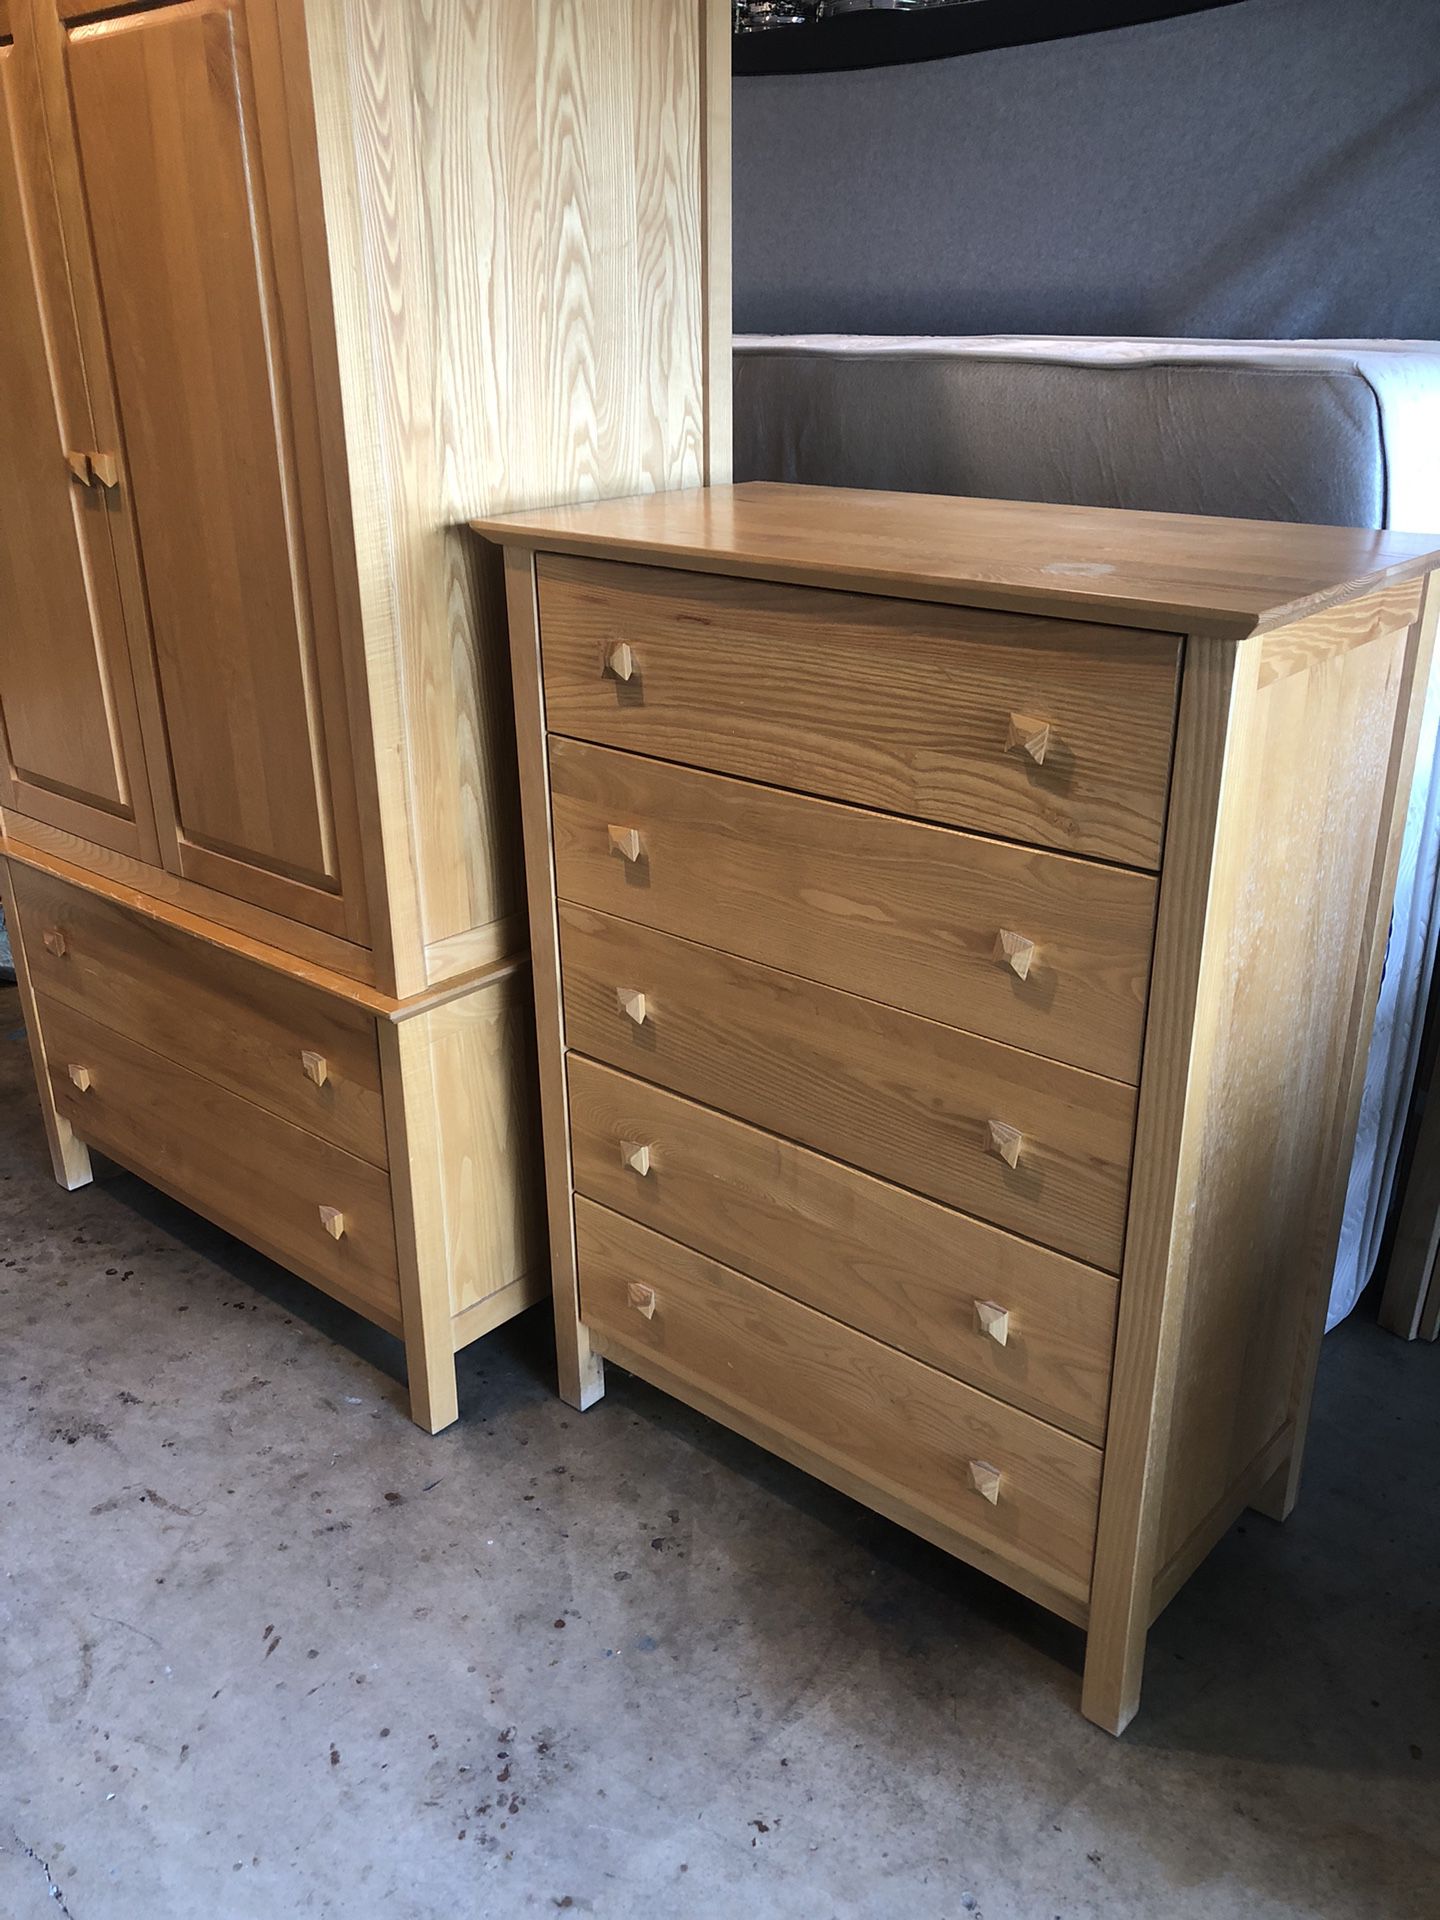 Complete Bedroom Set - Full Size - Very Good Condition